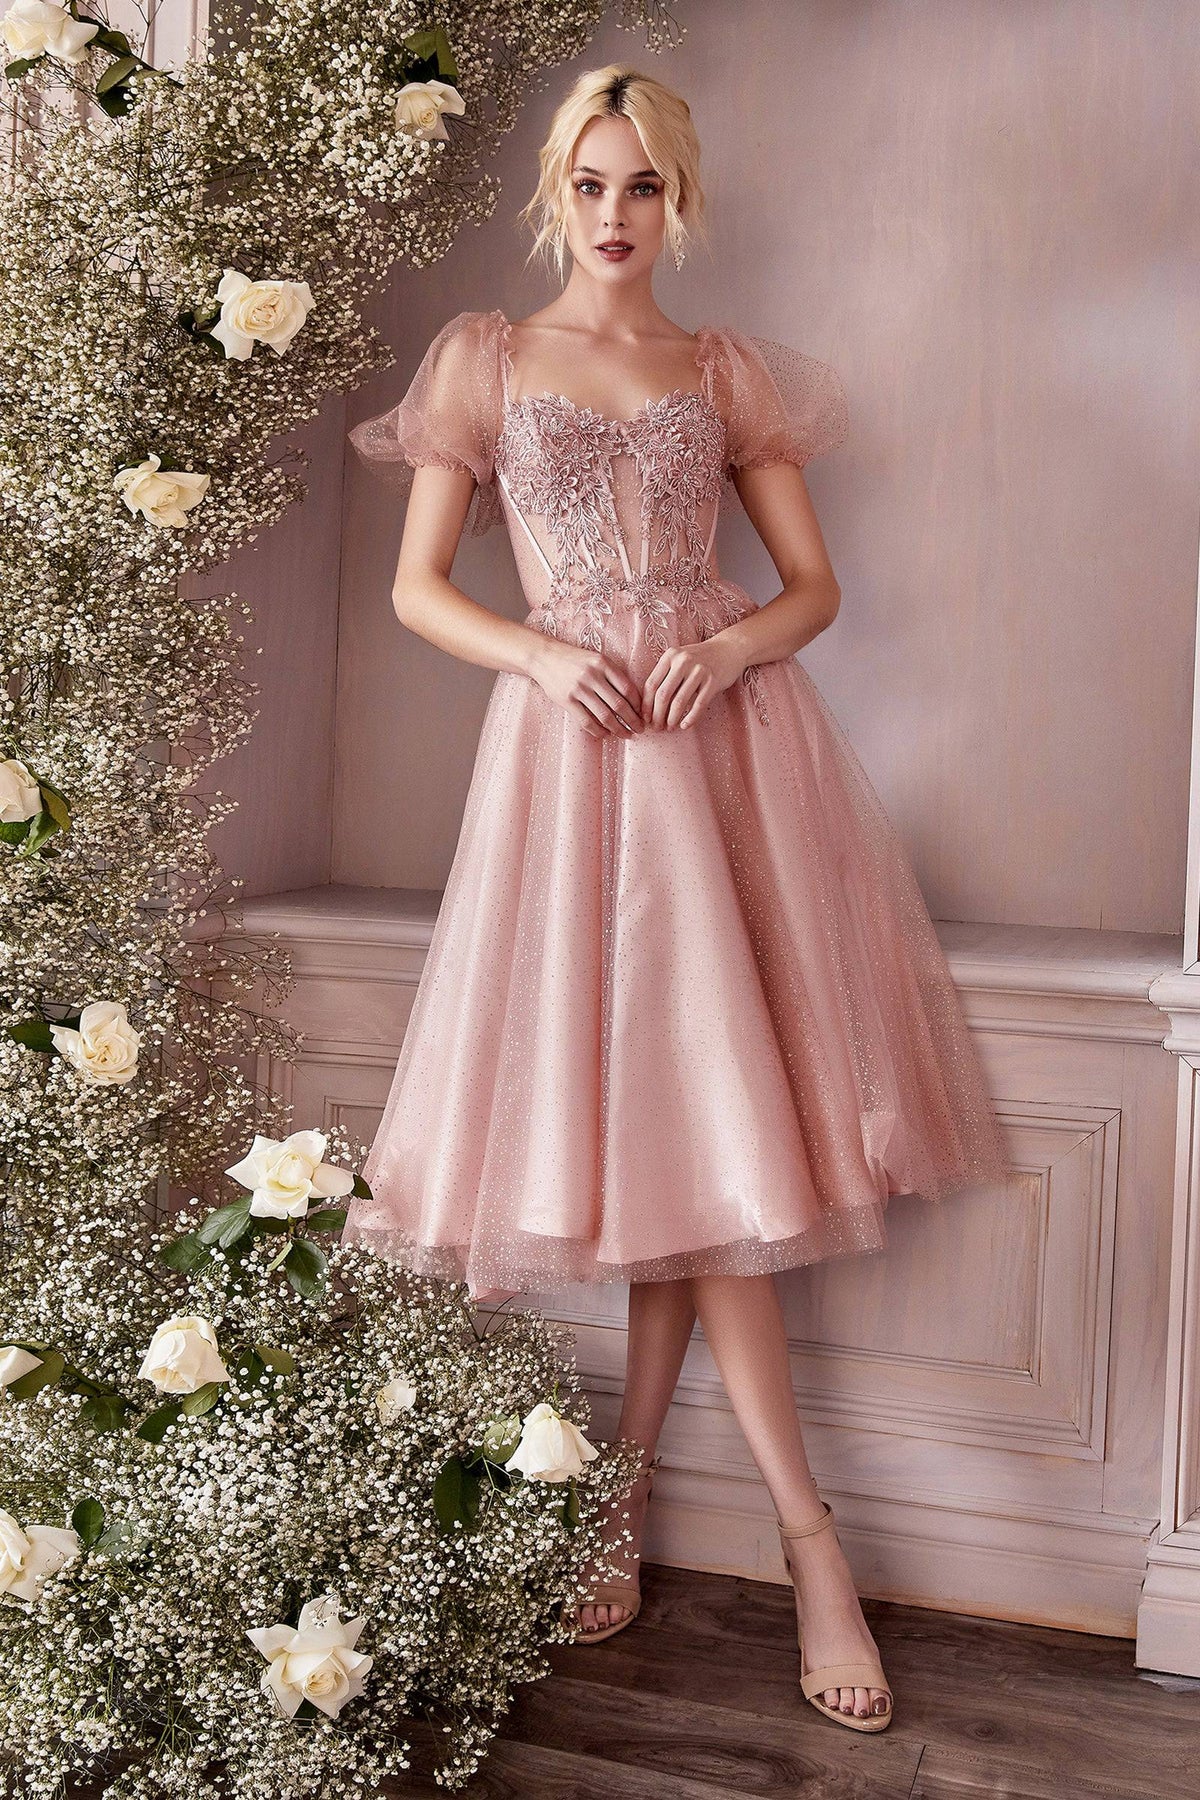 Gorgeous Shimmering Corset Style Dress With Floral Bodice #CDCD0187, Norma  Reed